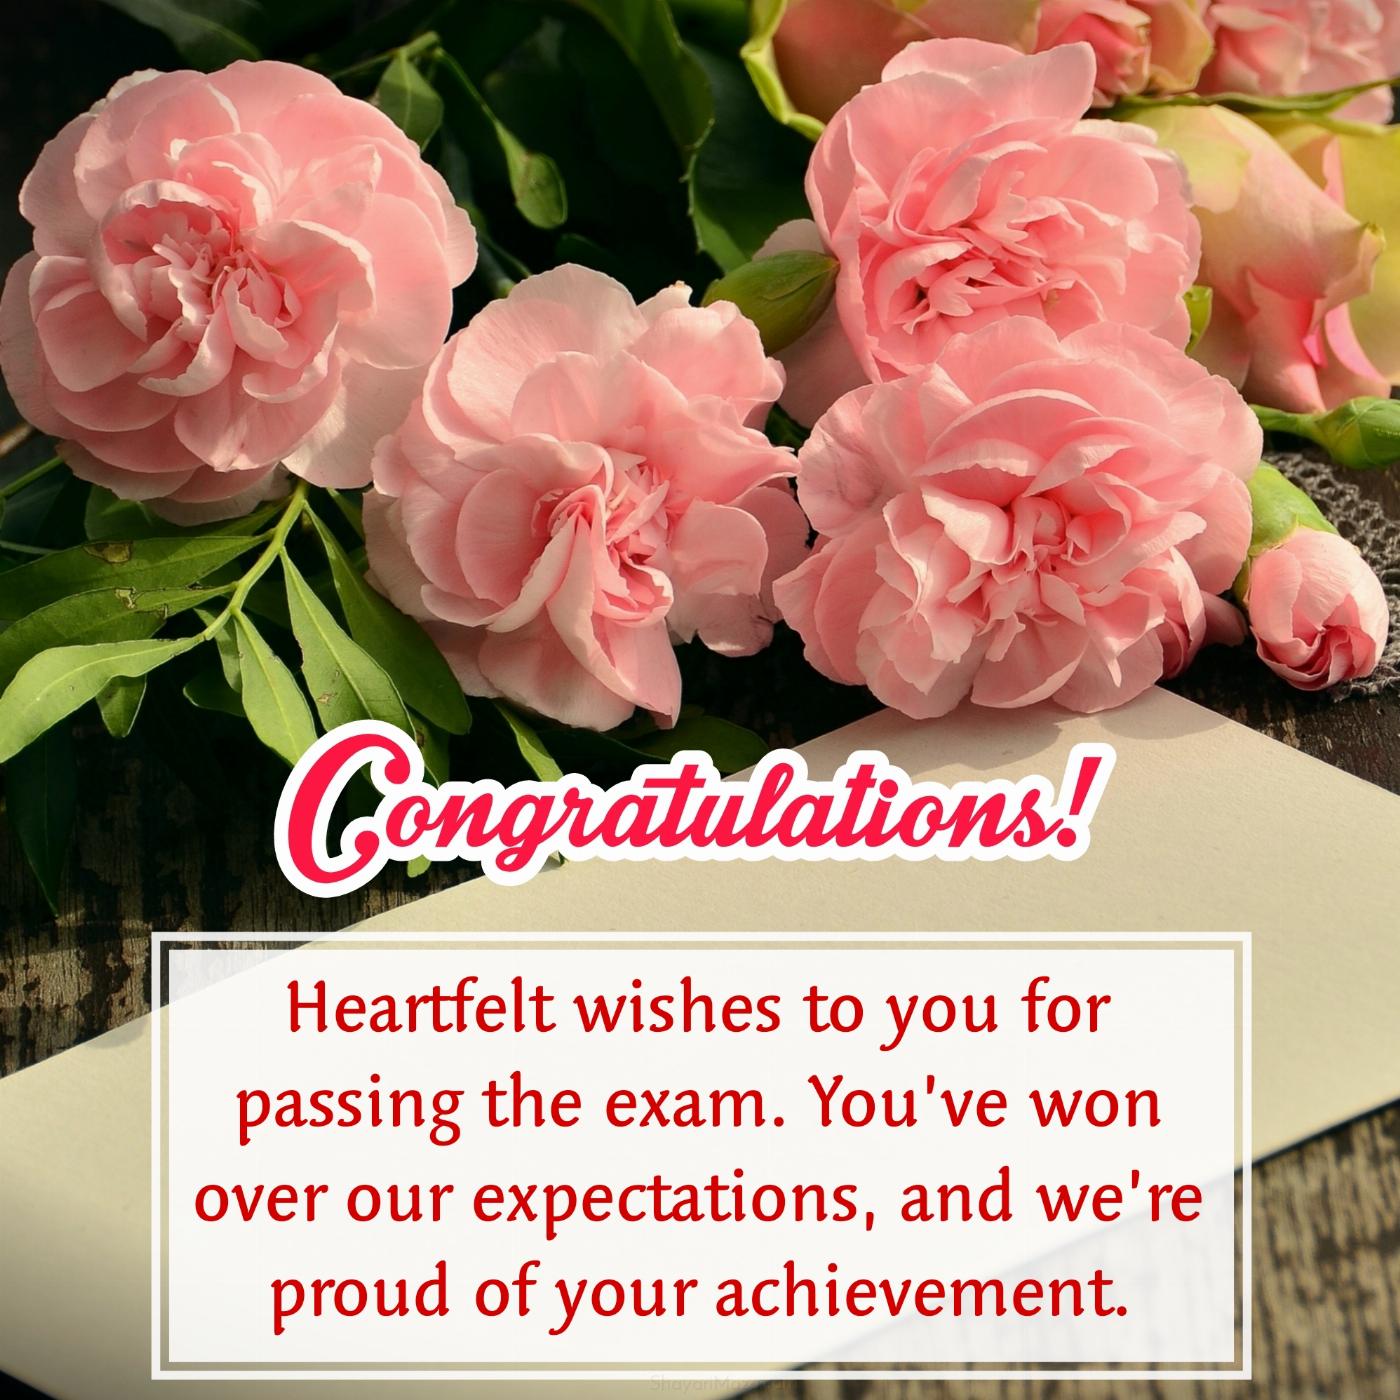 Heartfelt wishes to you for passing the exam